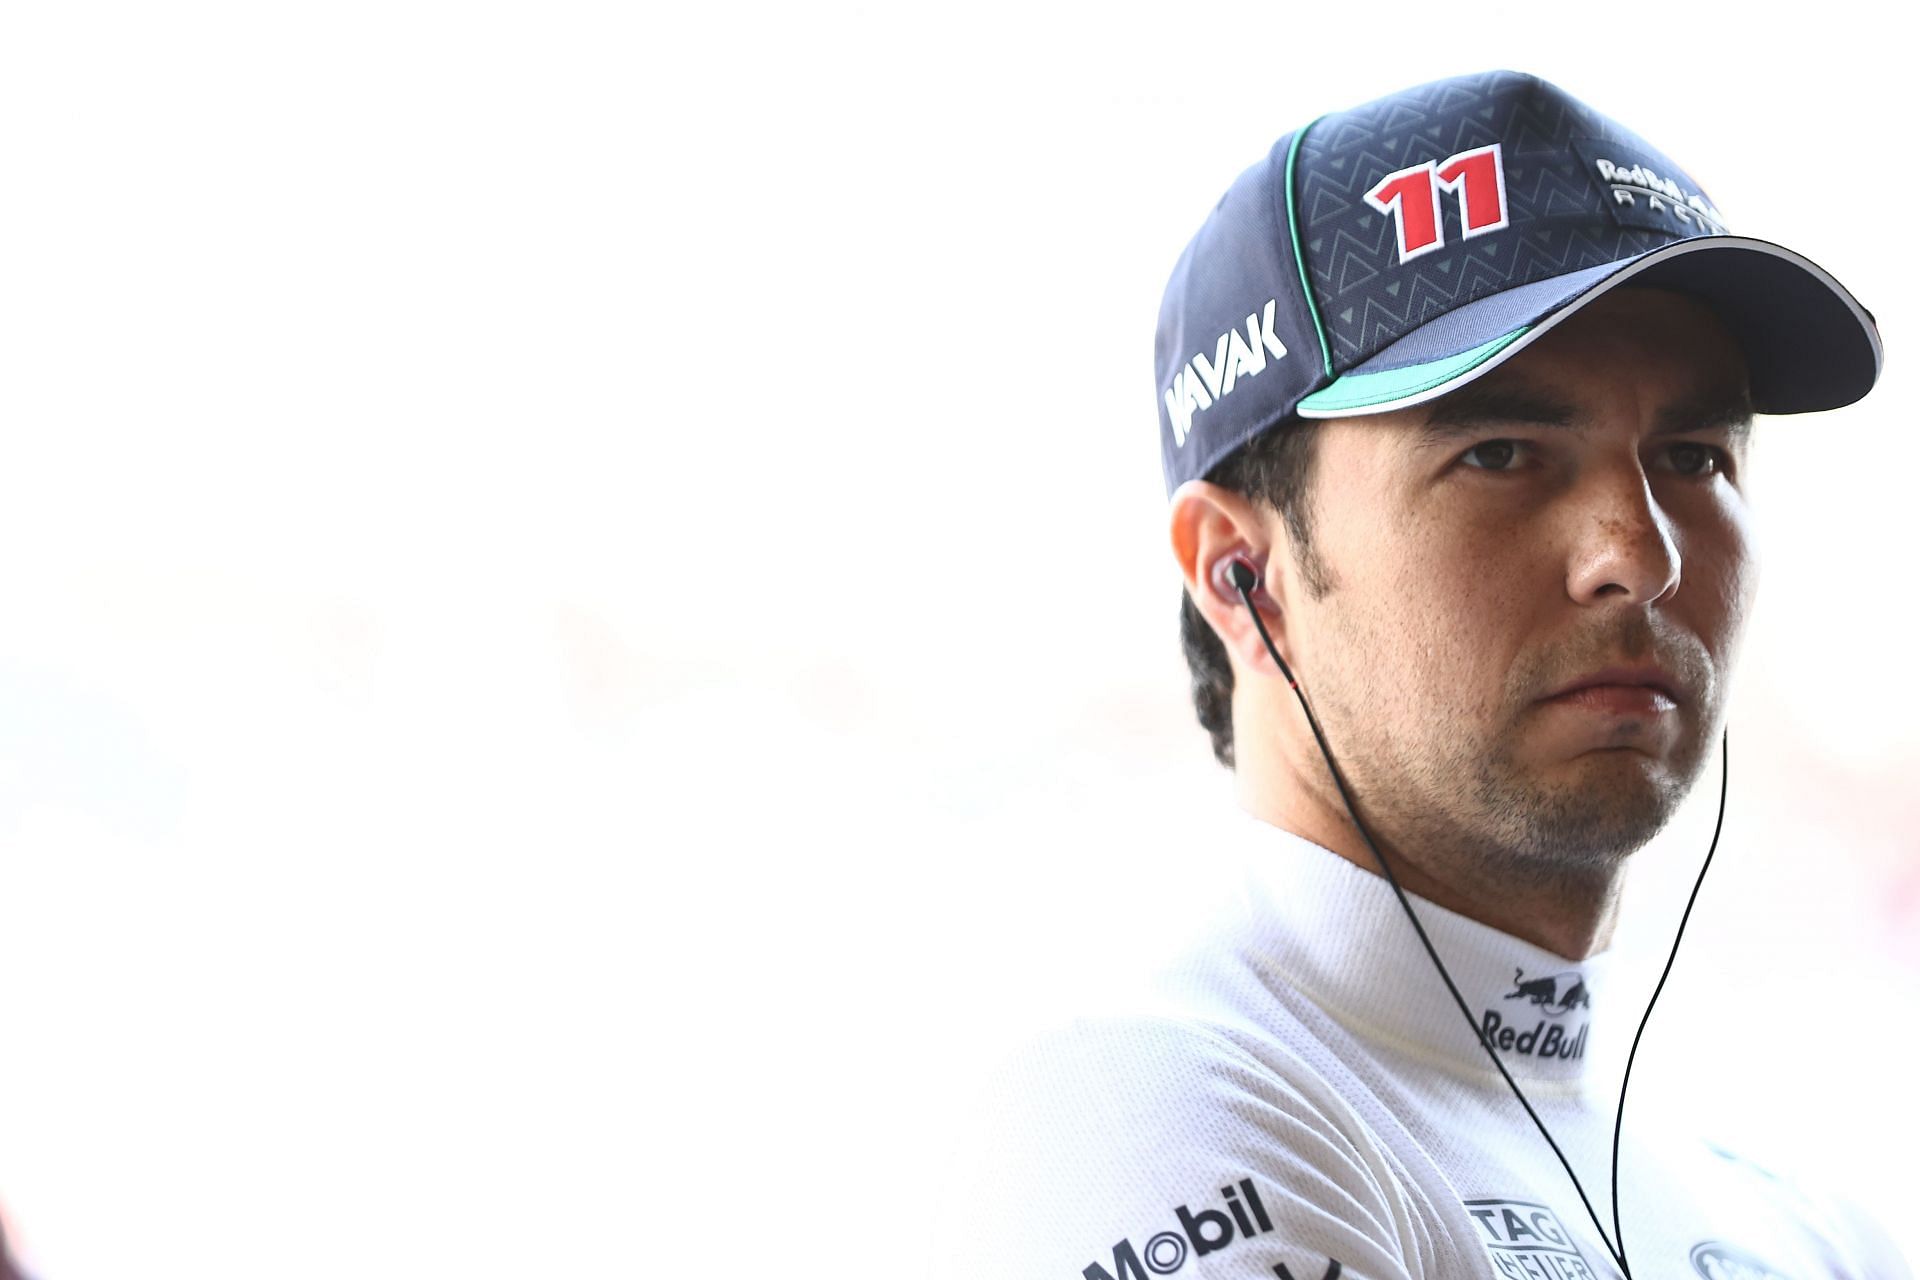 Sergio Perez prepares to drive in the garage during practice ahead of the 2021 Mexican GP. (Photo by Mark Thompson/Getty Images)